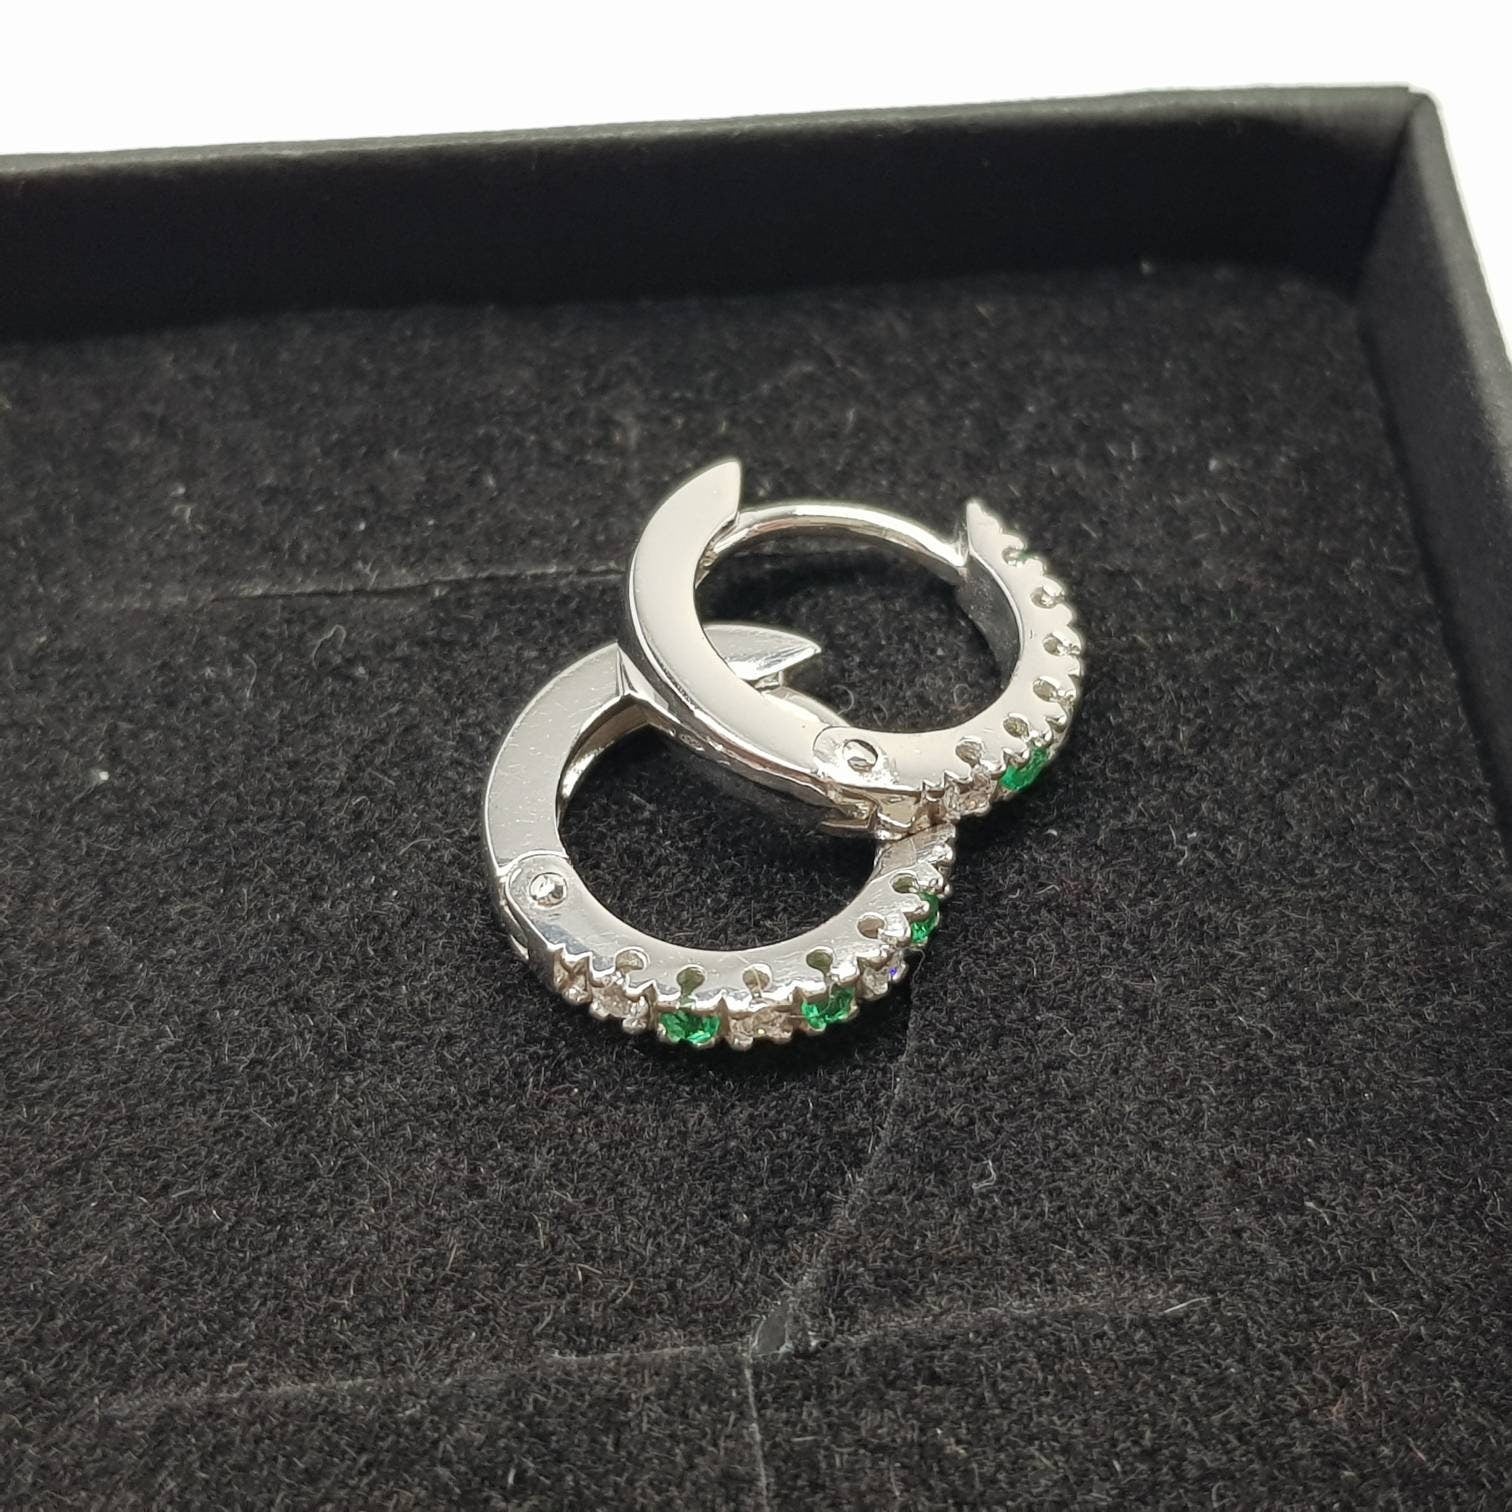 Small silver hoops with green and white CZs, mini hoop earrings, second hole huggies